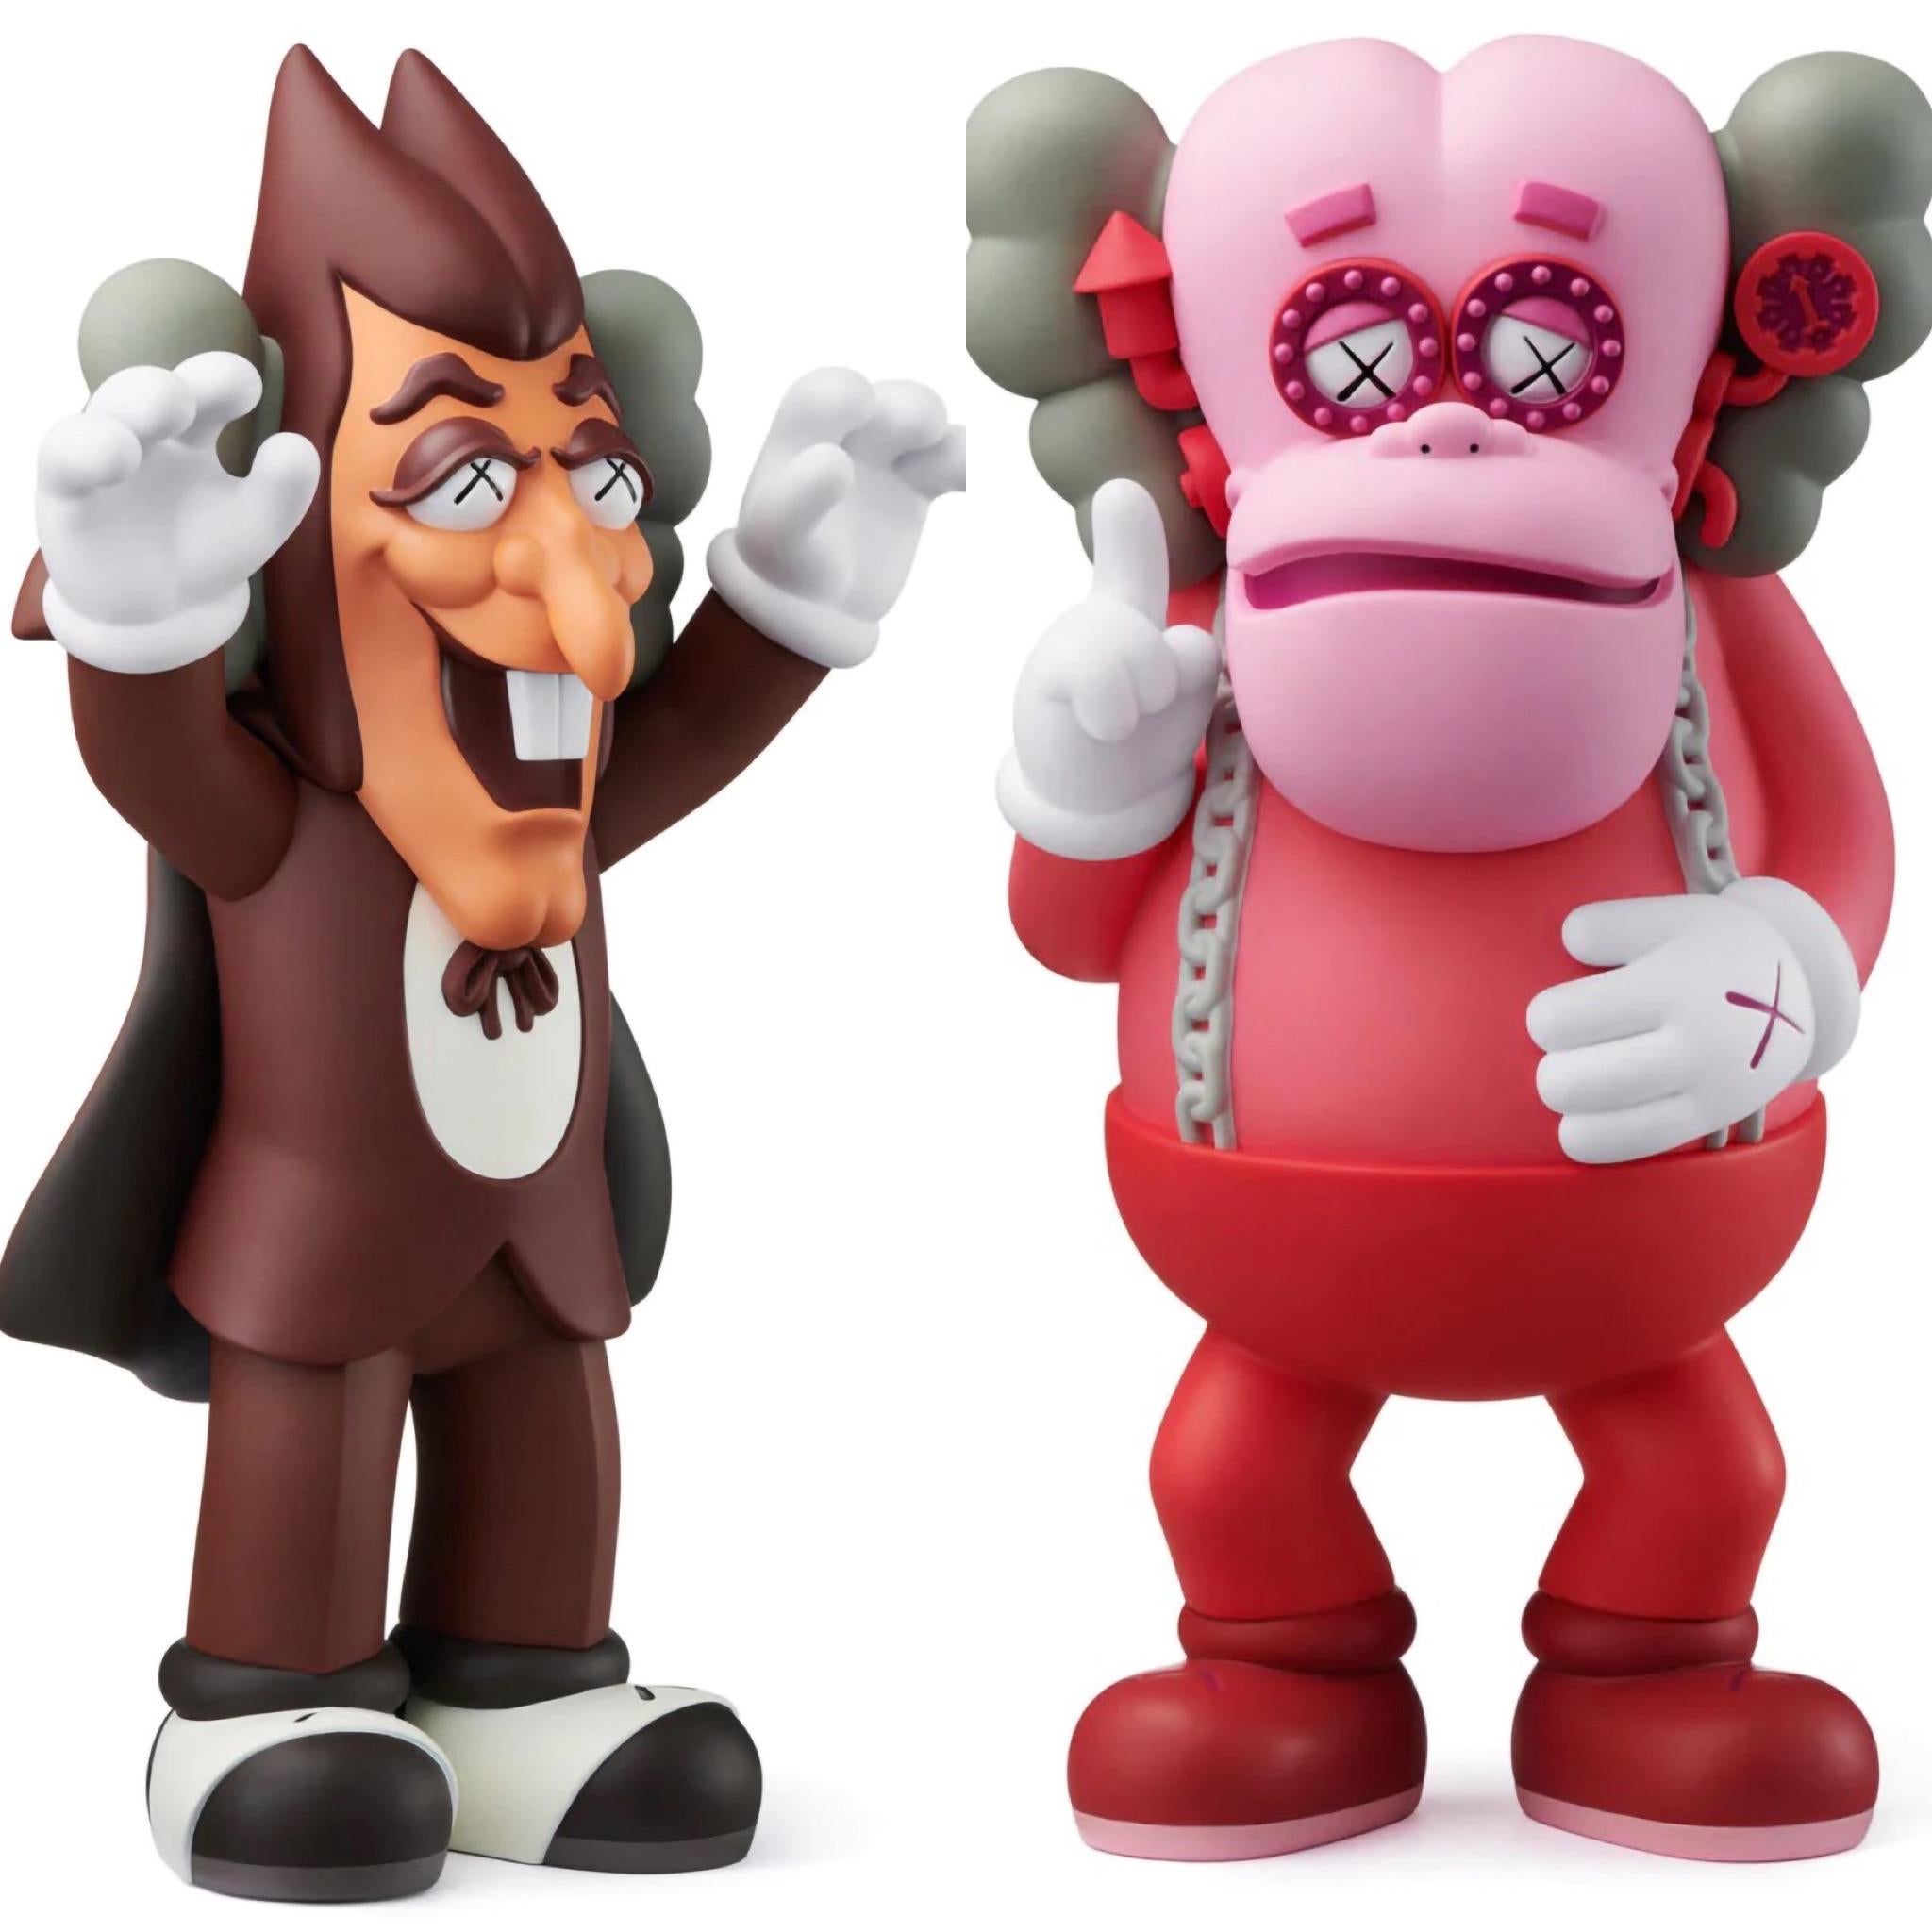 KAWS Monsters (set of 2 works):
A highly collectible & super decorative set of KAWS art toys, featuring the famed cereal characters: Frankenberry & Count Chocula.  A playful exploration of KAWS’s love for these timeless pop cultural characters